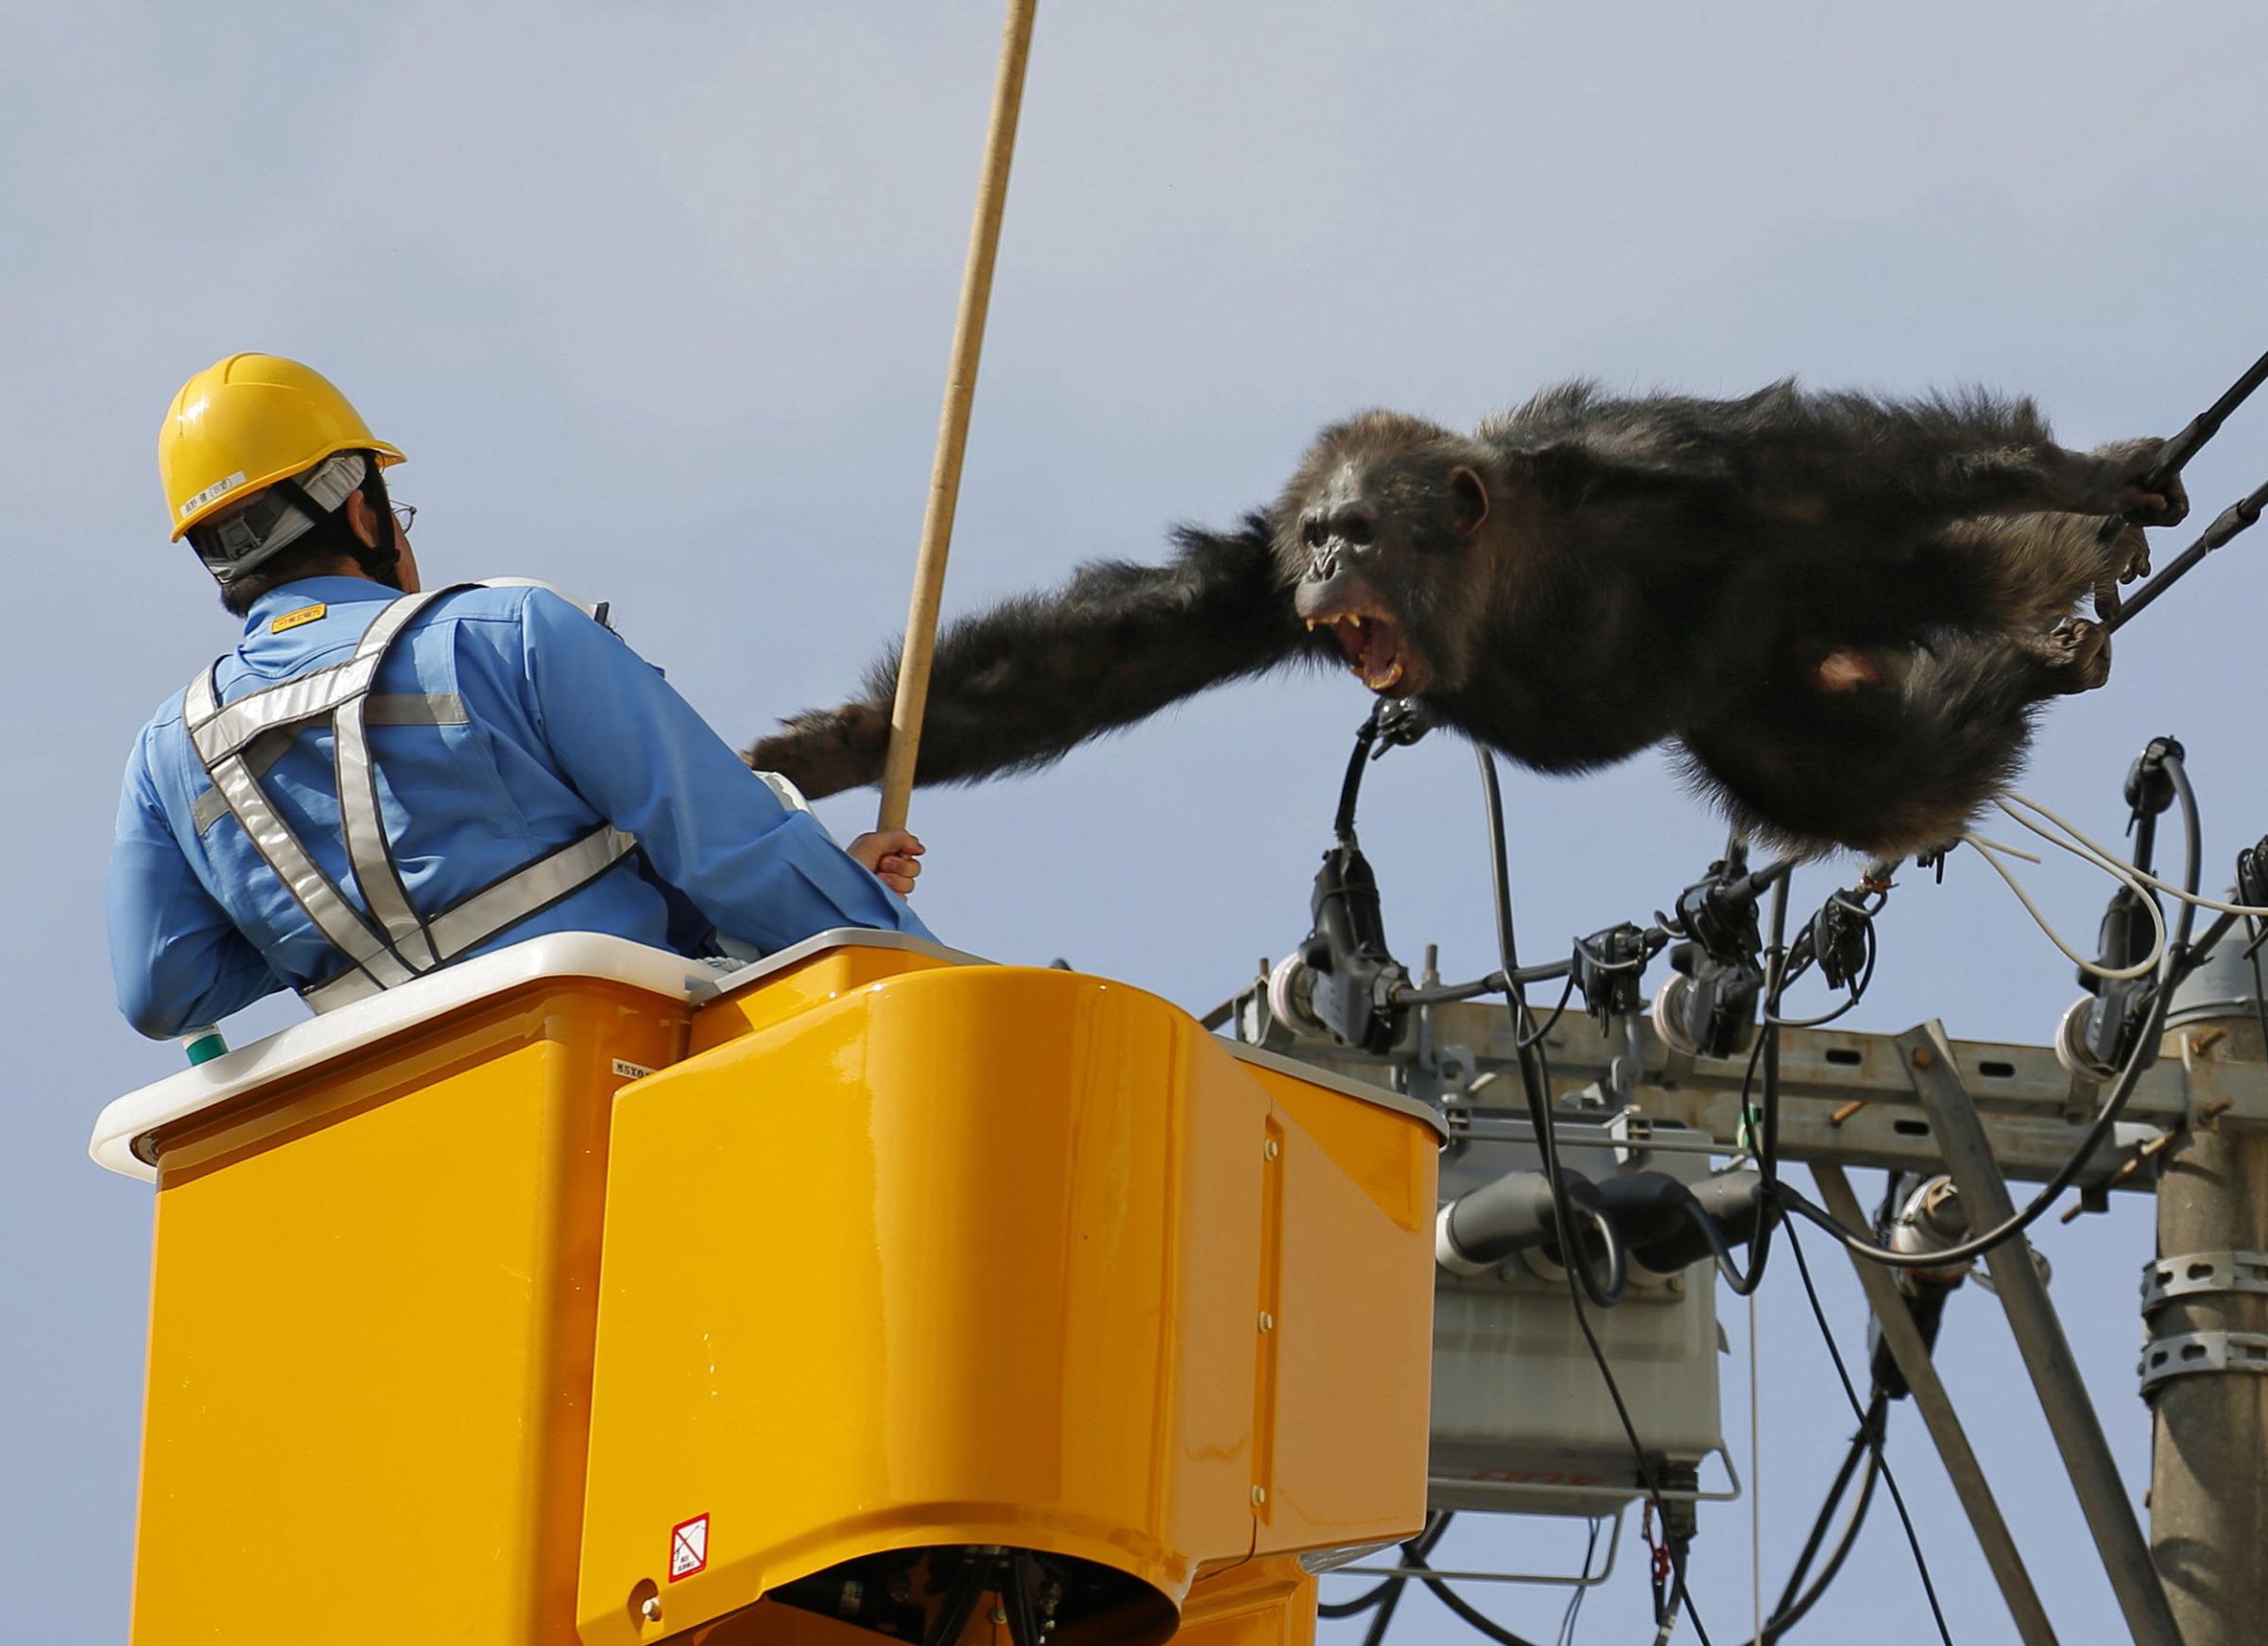 Male chimpanzee Chacha screams at a man trying to capture him on power lines in a residential area of Sendai, Japan, on April 14, 2016.